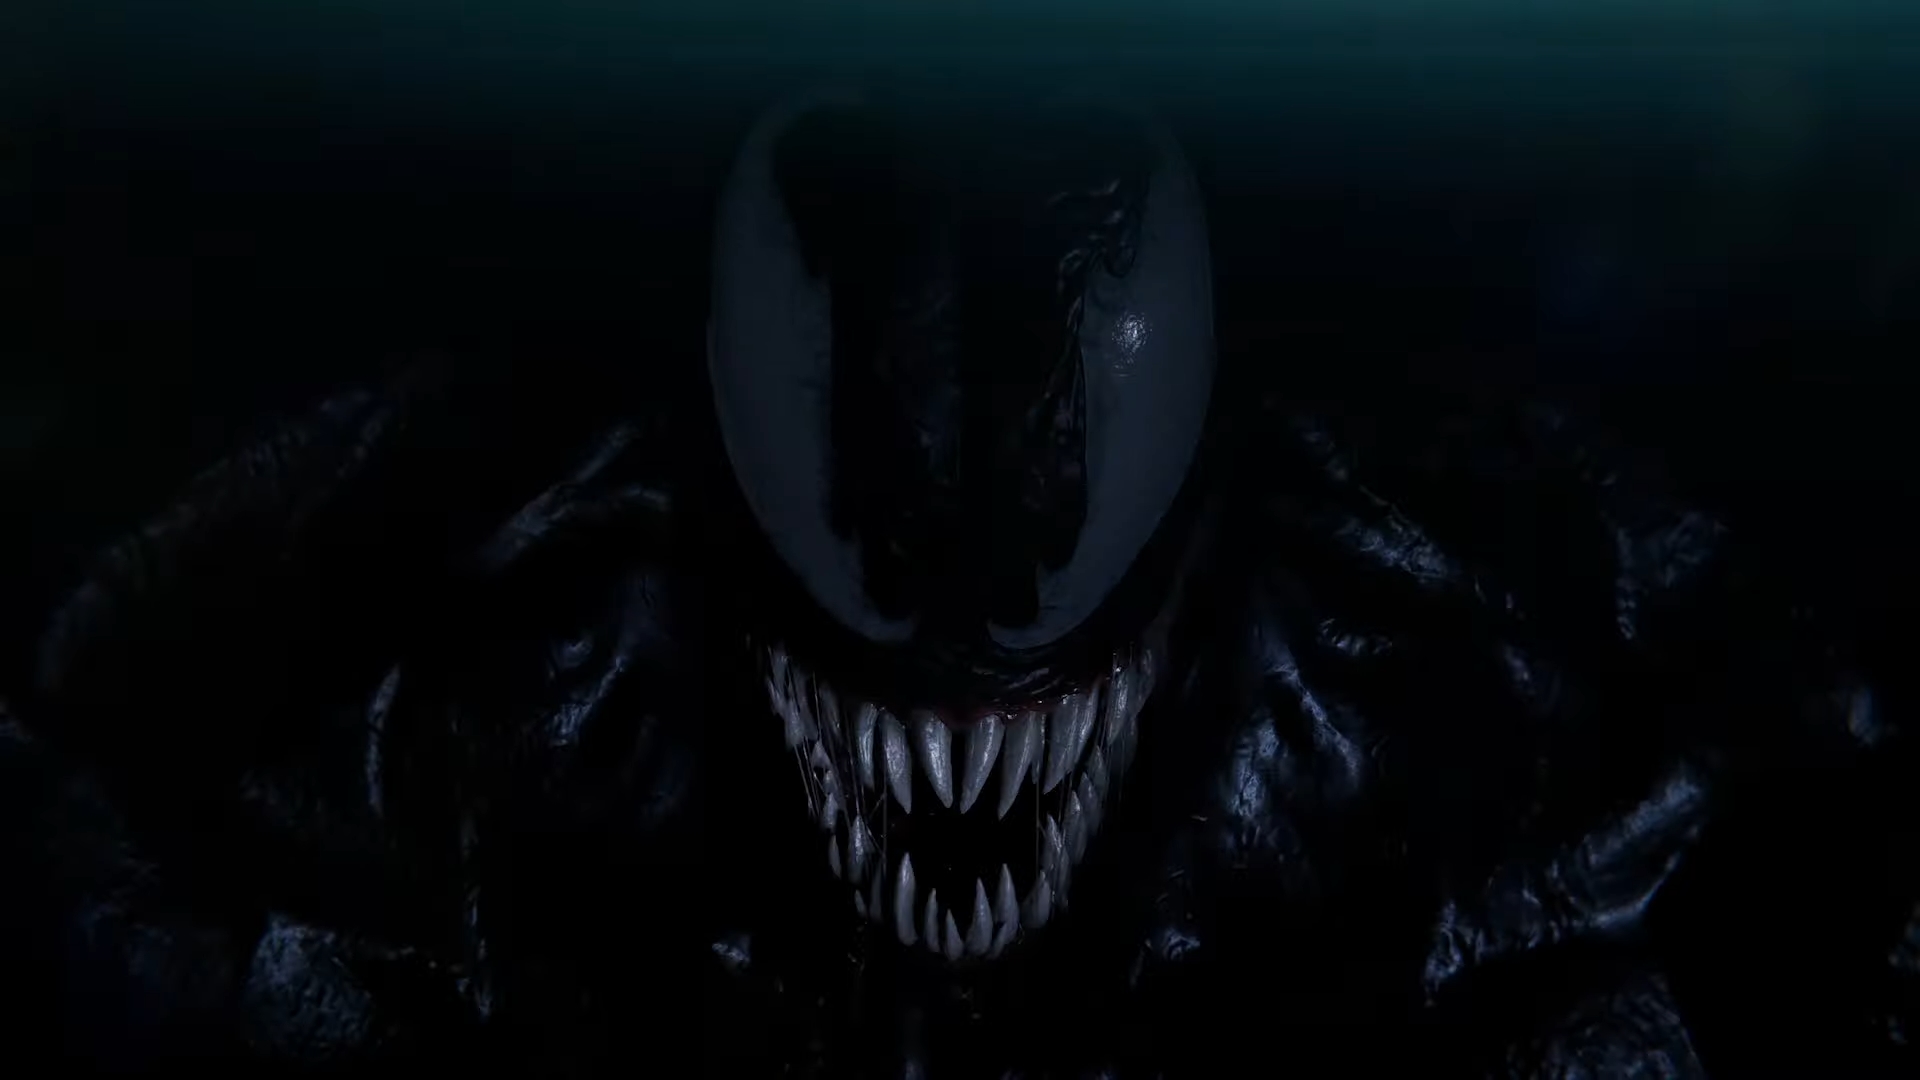 A screenshot from the Marvel's Spider-Man 2 trailer showing a close-up of Venom